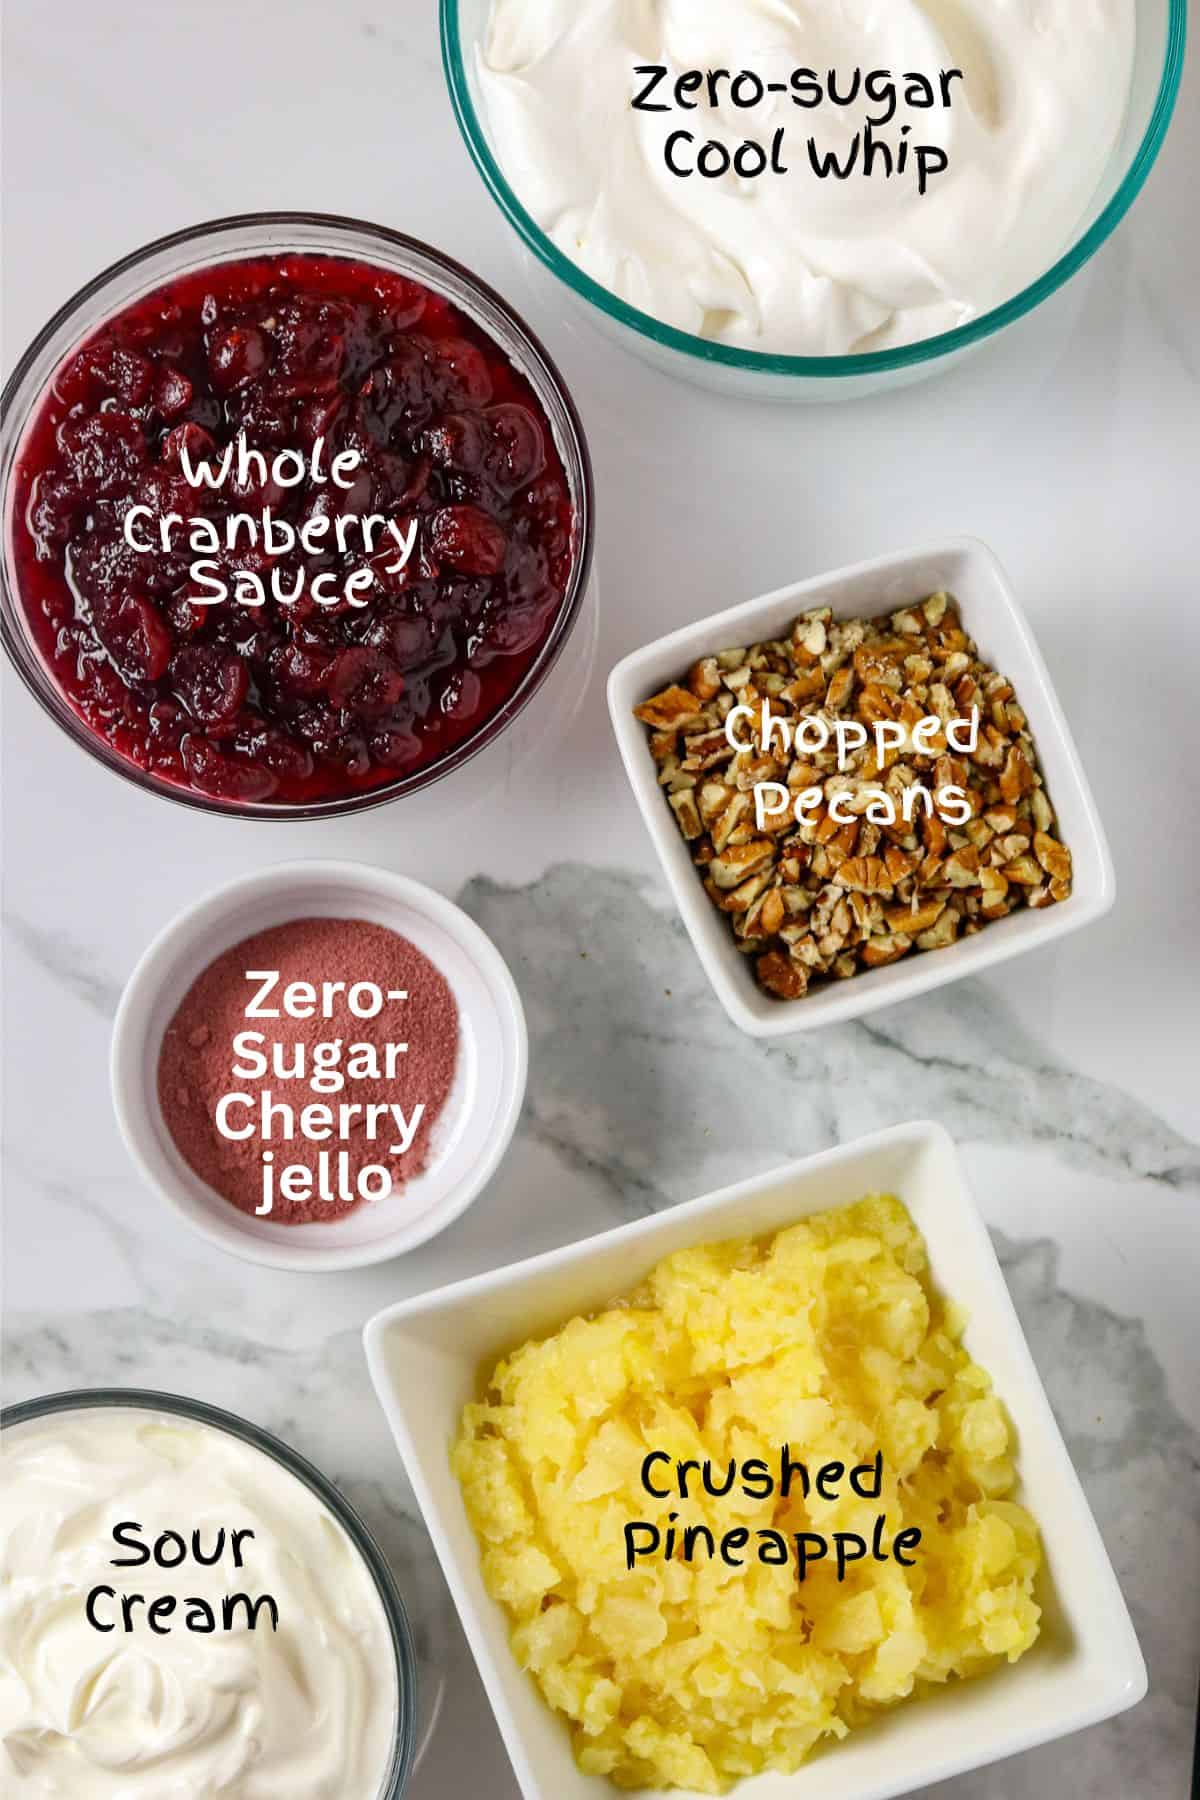 Ingredients of cranberry sauce, sour cream, pineapple, jello, whipped topping, and pecans in individual containers on a countertop.